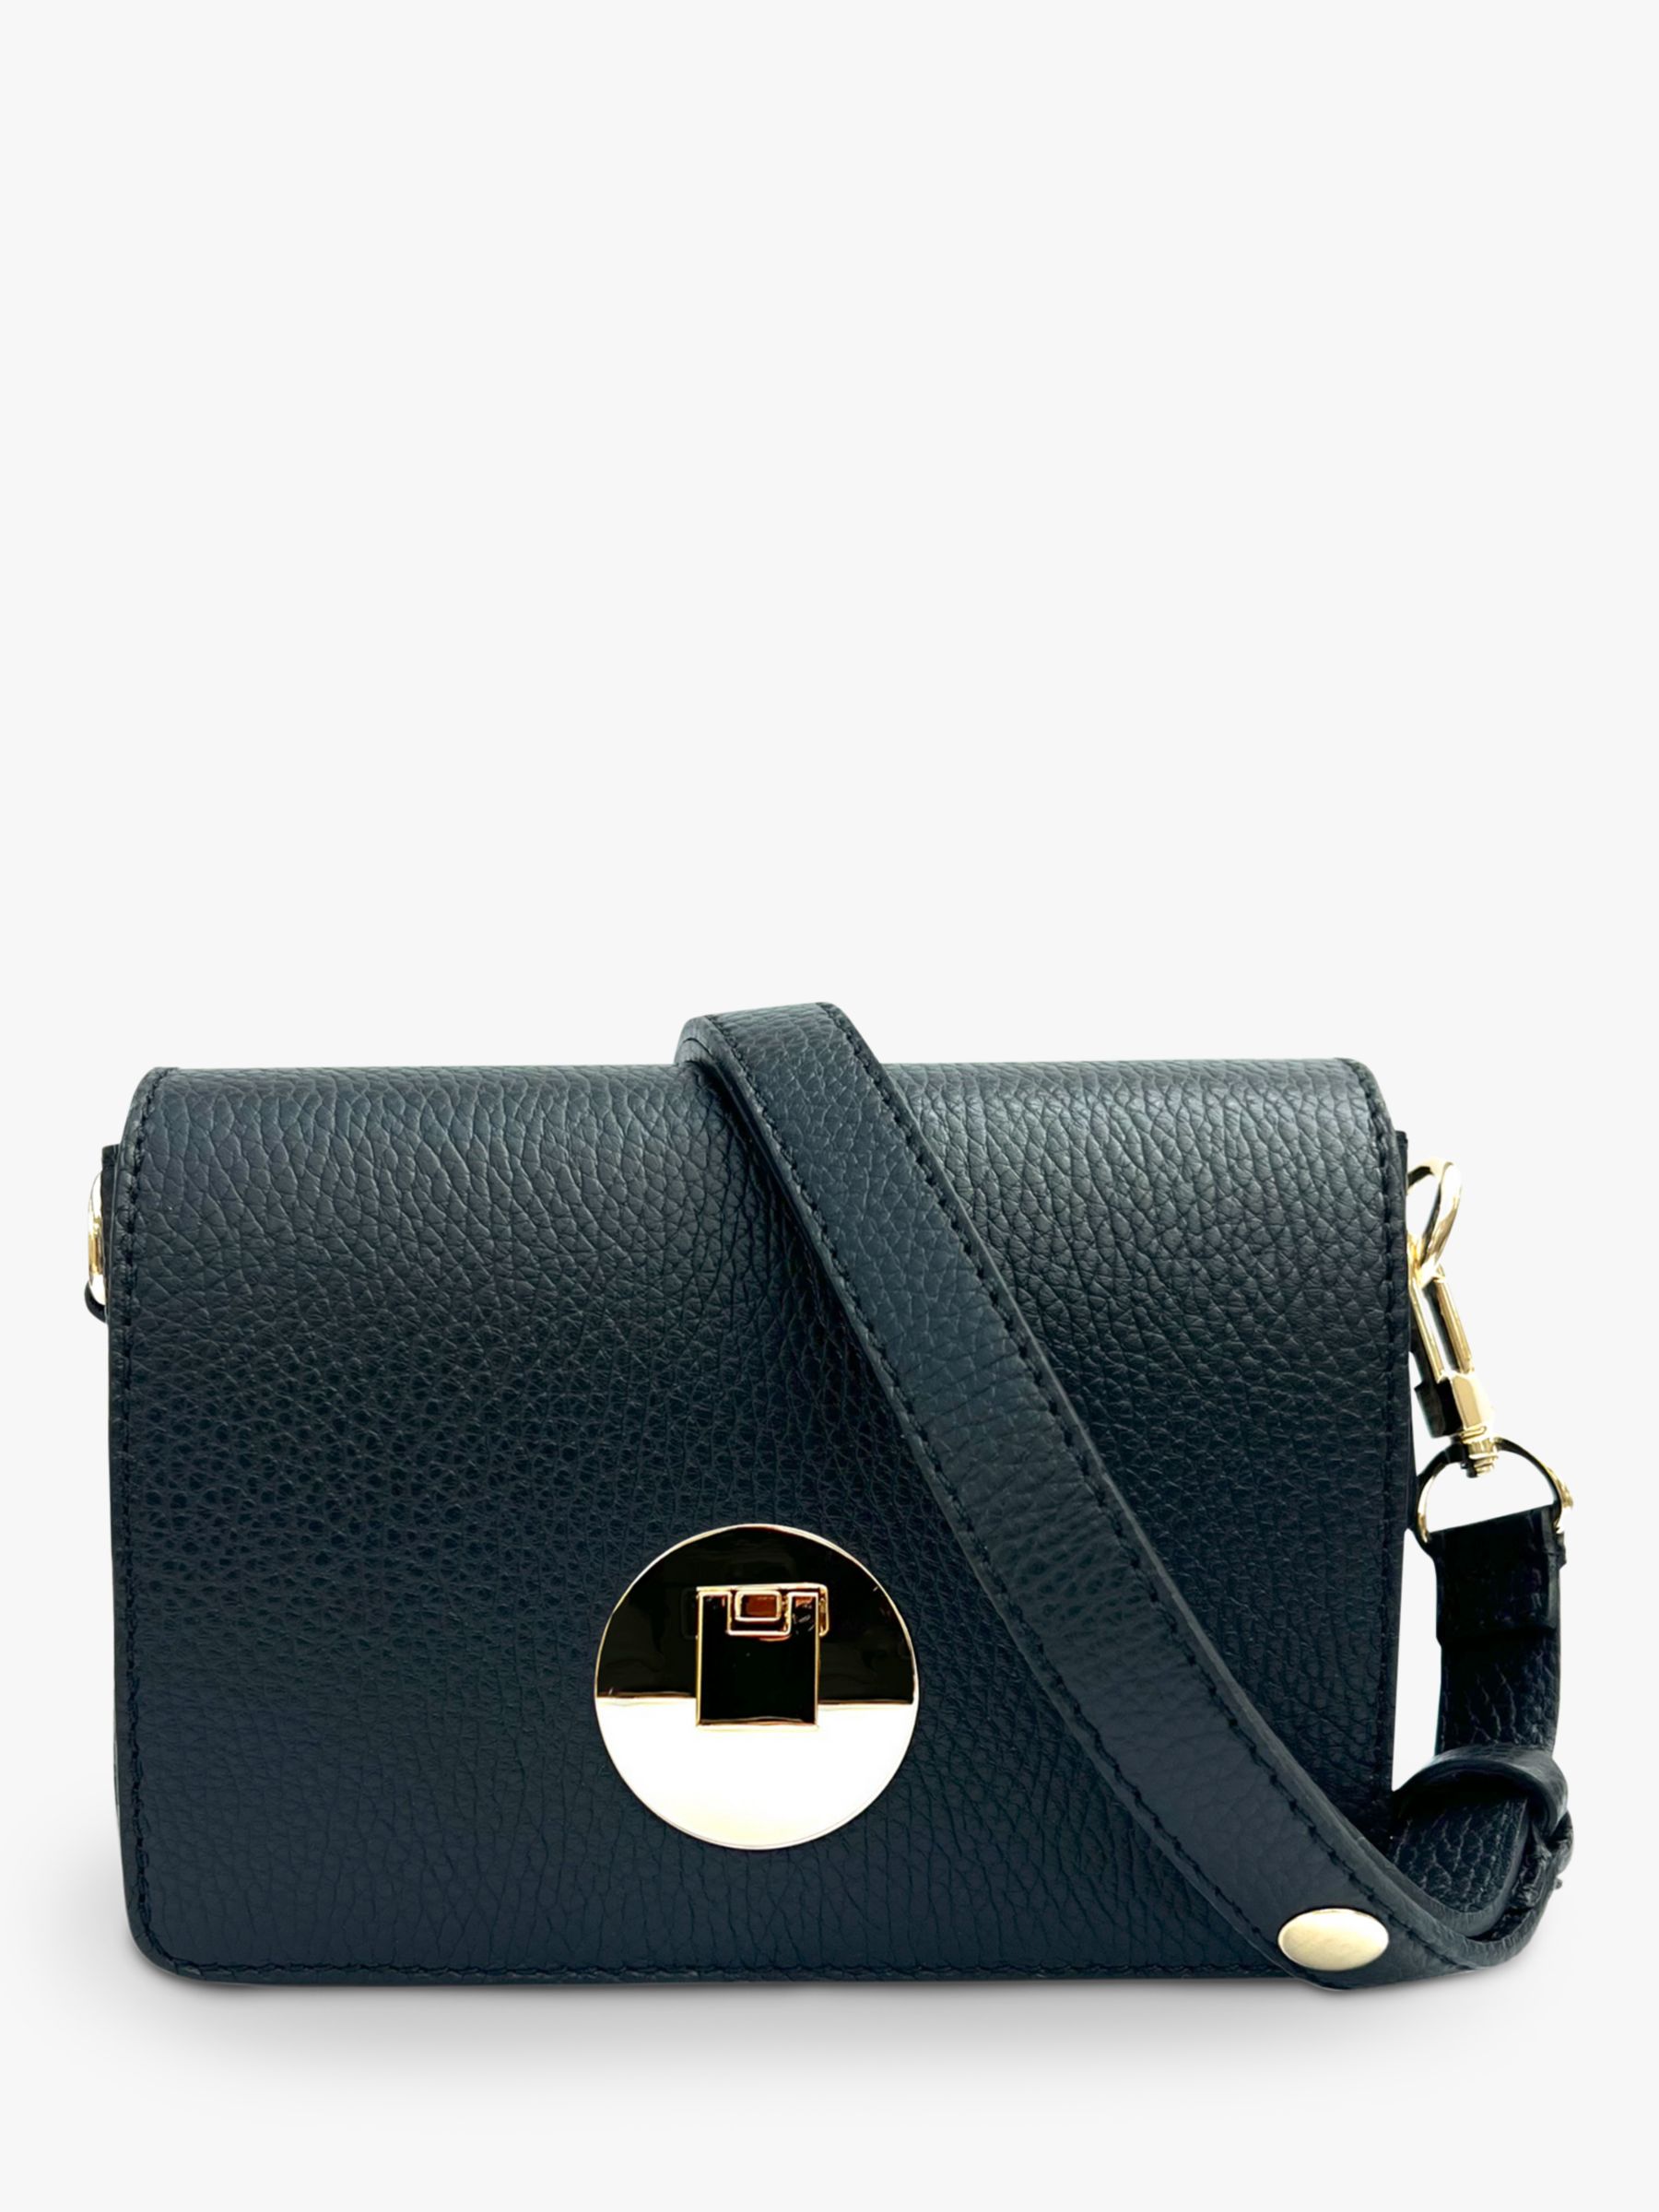 Apatchy The Newbury Leather Crossbody Bag, Black at John Lewis & Partners